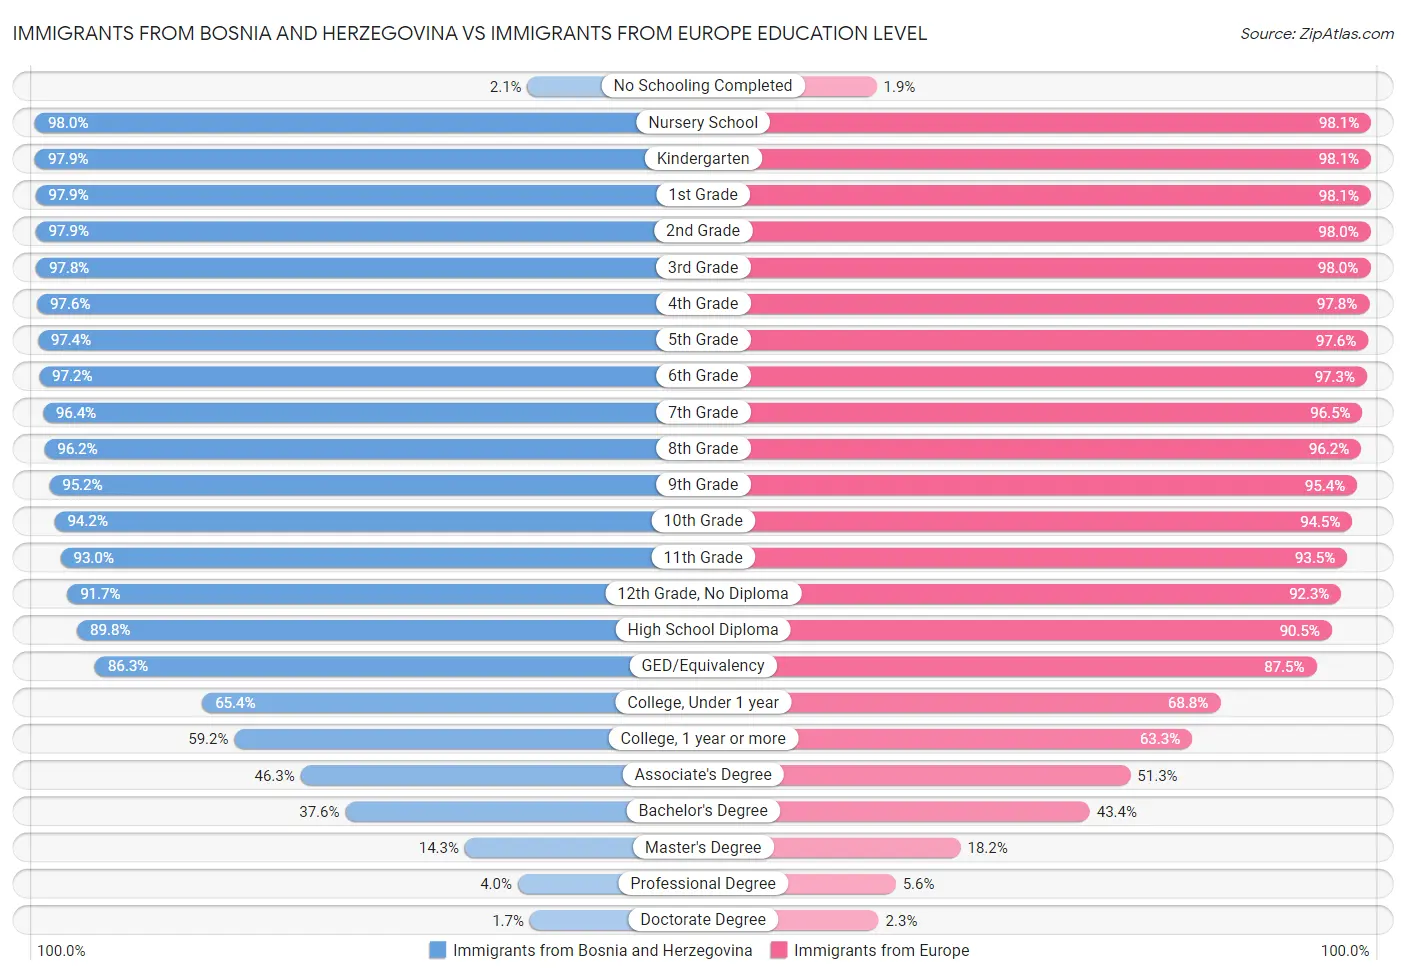 Immigrants from Bosnia and Herzegovina vs Immigrants from Europe Education Level